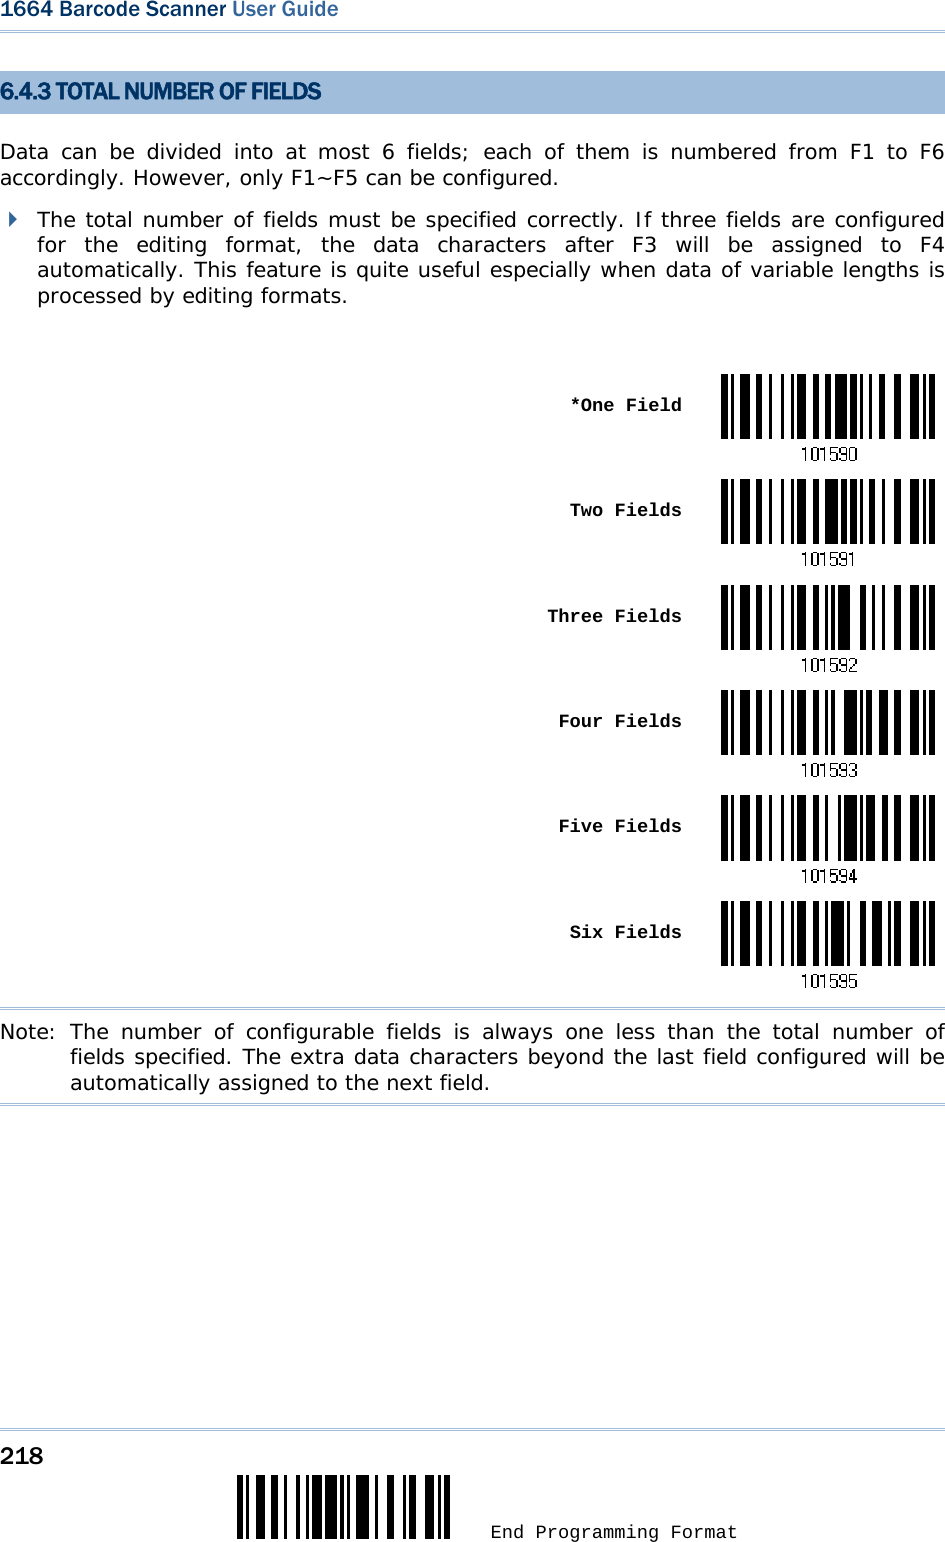 218  End Programming Format 1664 Barcode Scanner User Guide  6.4.3 TOTAL NUMBER OF FIELDS Data can be divided into at most 6 fields; each of them is numbered from F1 to F6 accordingly. However, only F1~F5 can be configured.   The total number of fields must be specified correctly. If three fields are configured for the editing format, the data characters after F3 will be assigned to F4 automatically. This feature is quite useful especially when data of variable lengths is processed by editing formats.   *One Field Two Fields Three Fields Four Fields Five Fields Six FieldsNote: The number of configurable fields is always one less than the total number of fields specified. The extra data characters beyond the last field configured will be automatically assigned to the next field.  